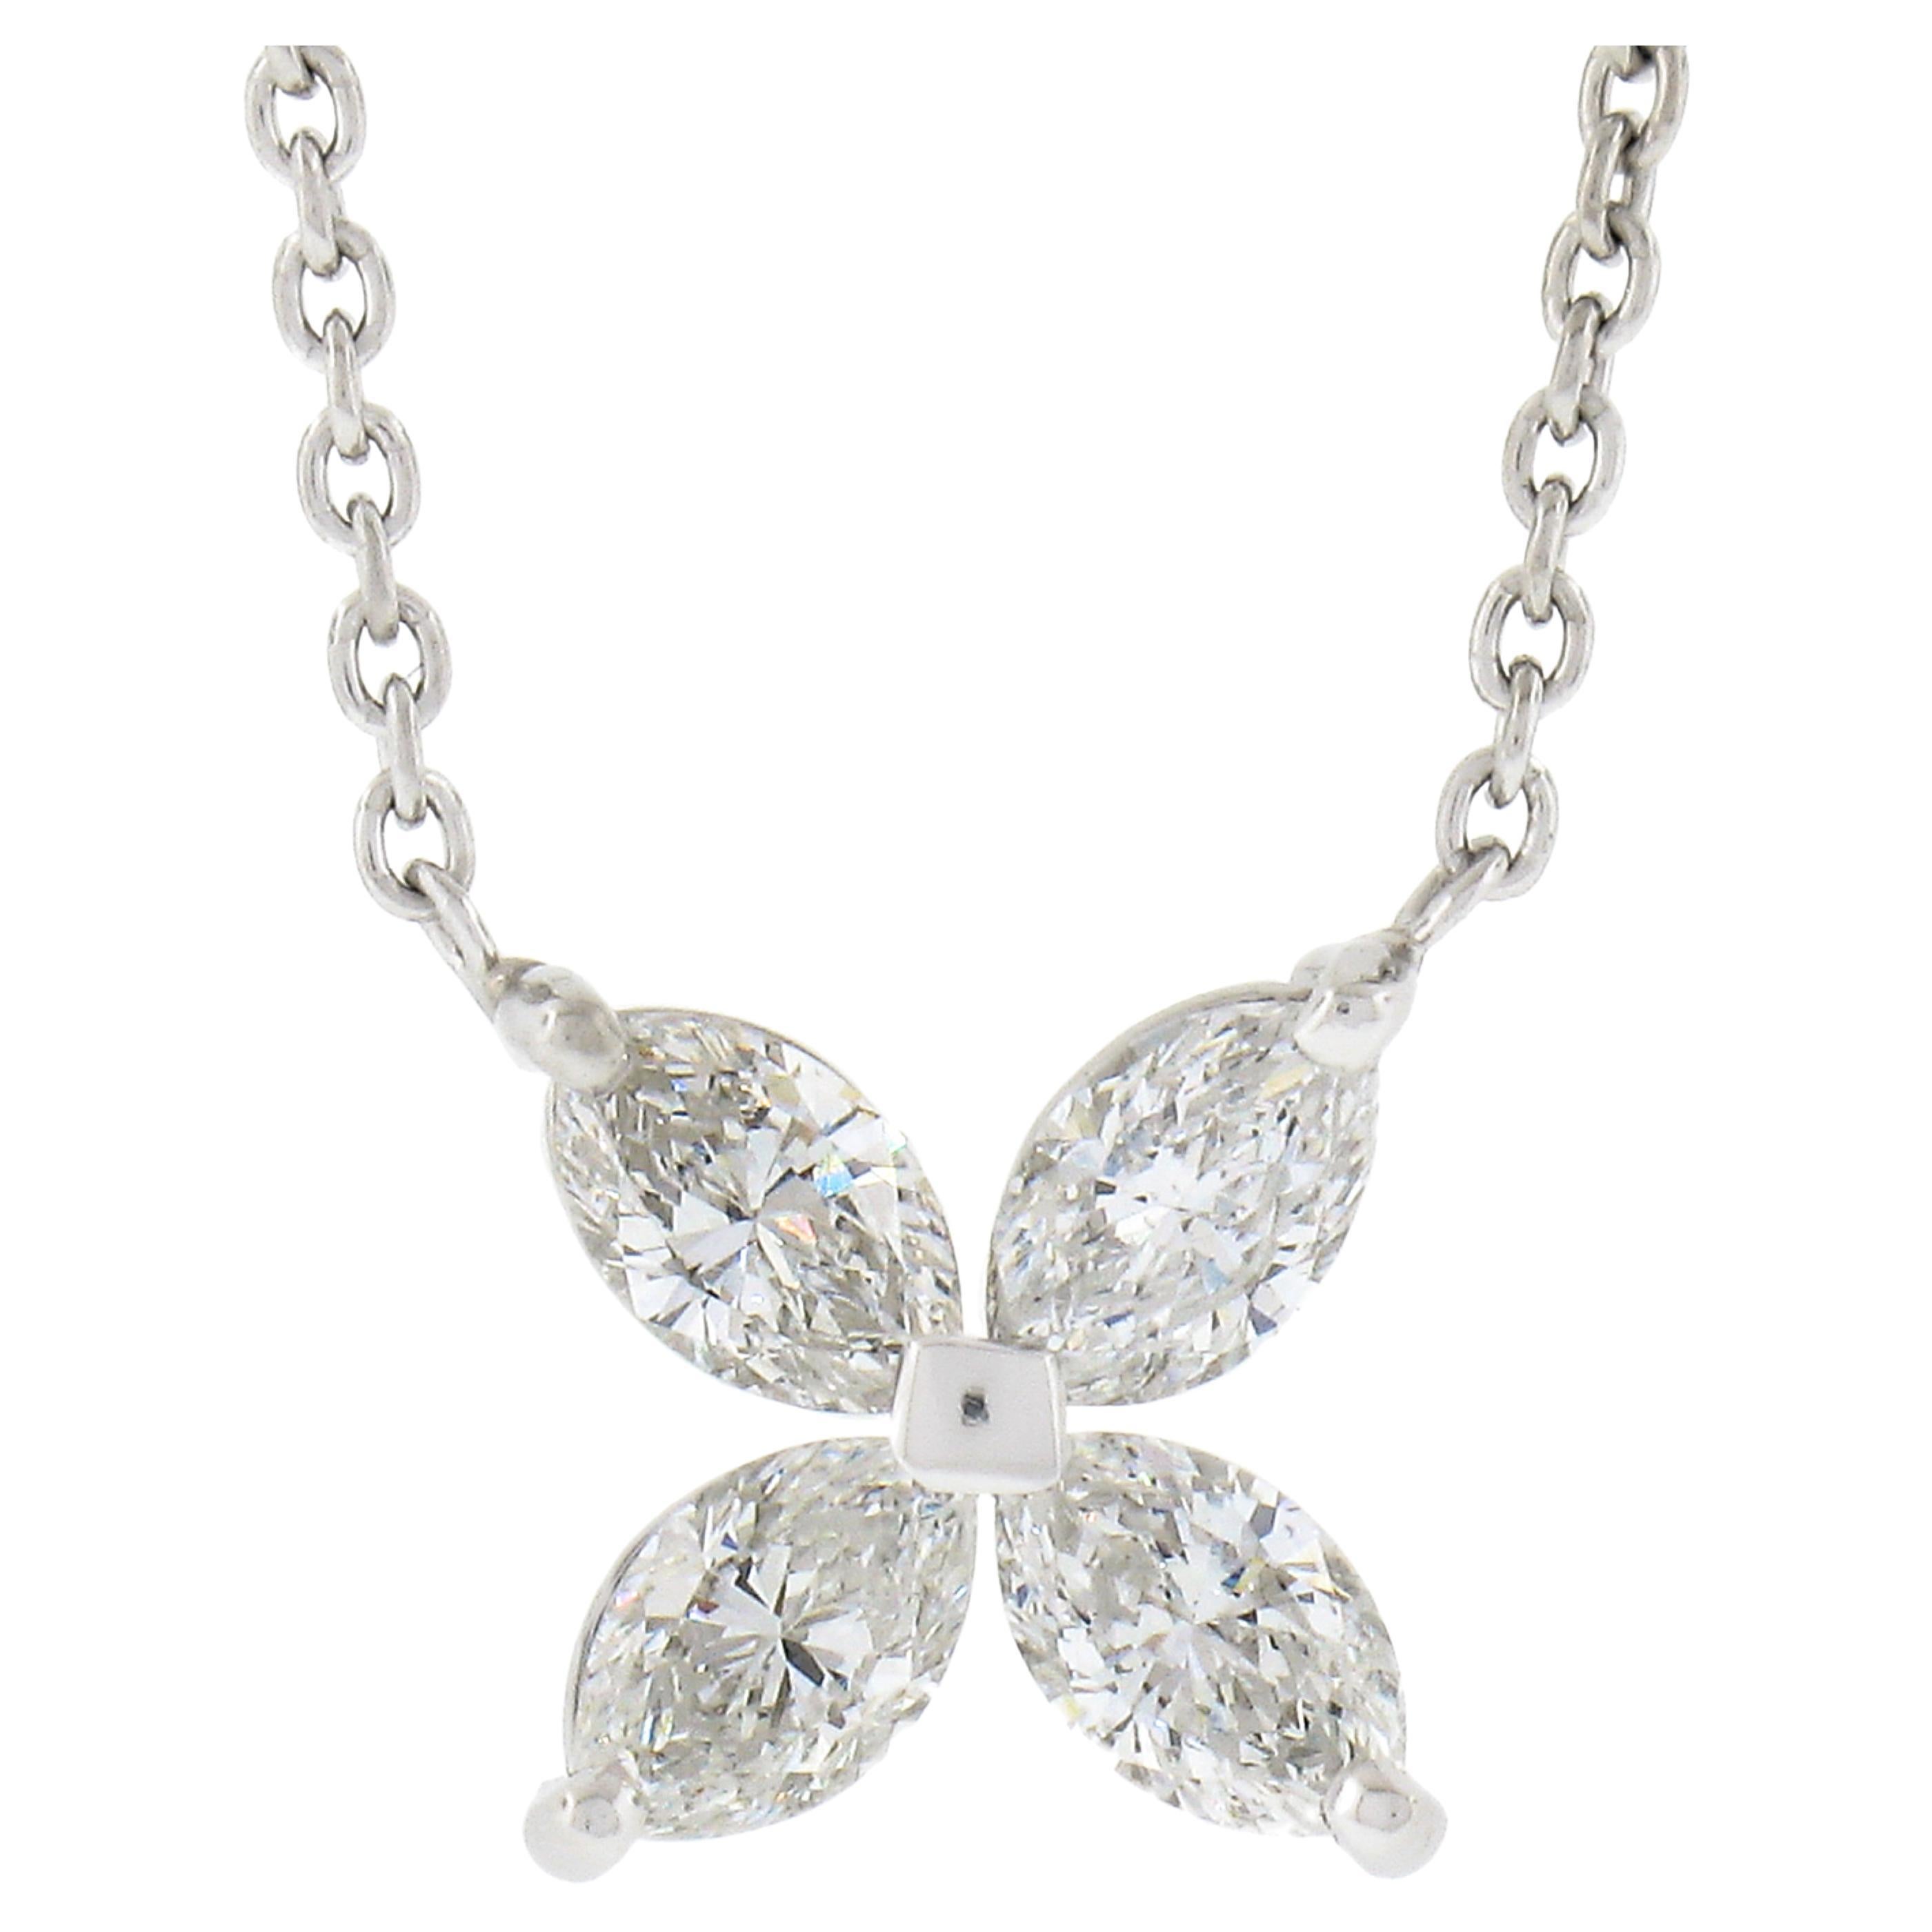 NEW Platinum 0.56carat Prong Marquise Diamond Flower Butterfly Pendant Necklace